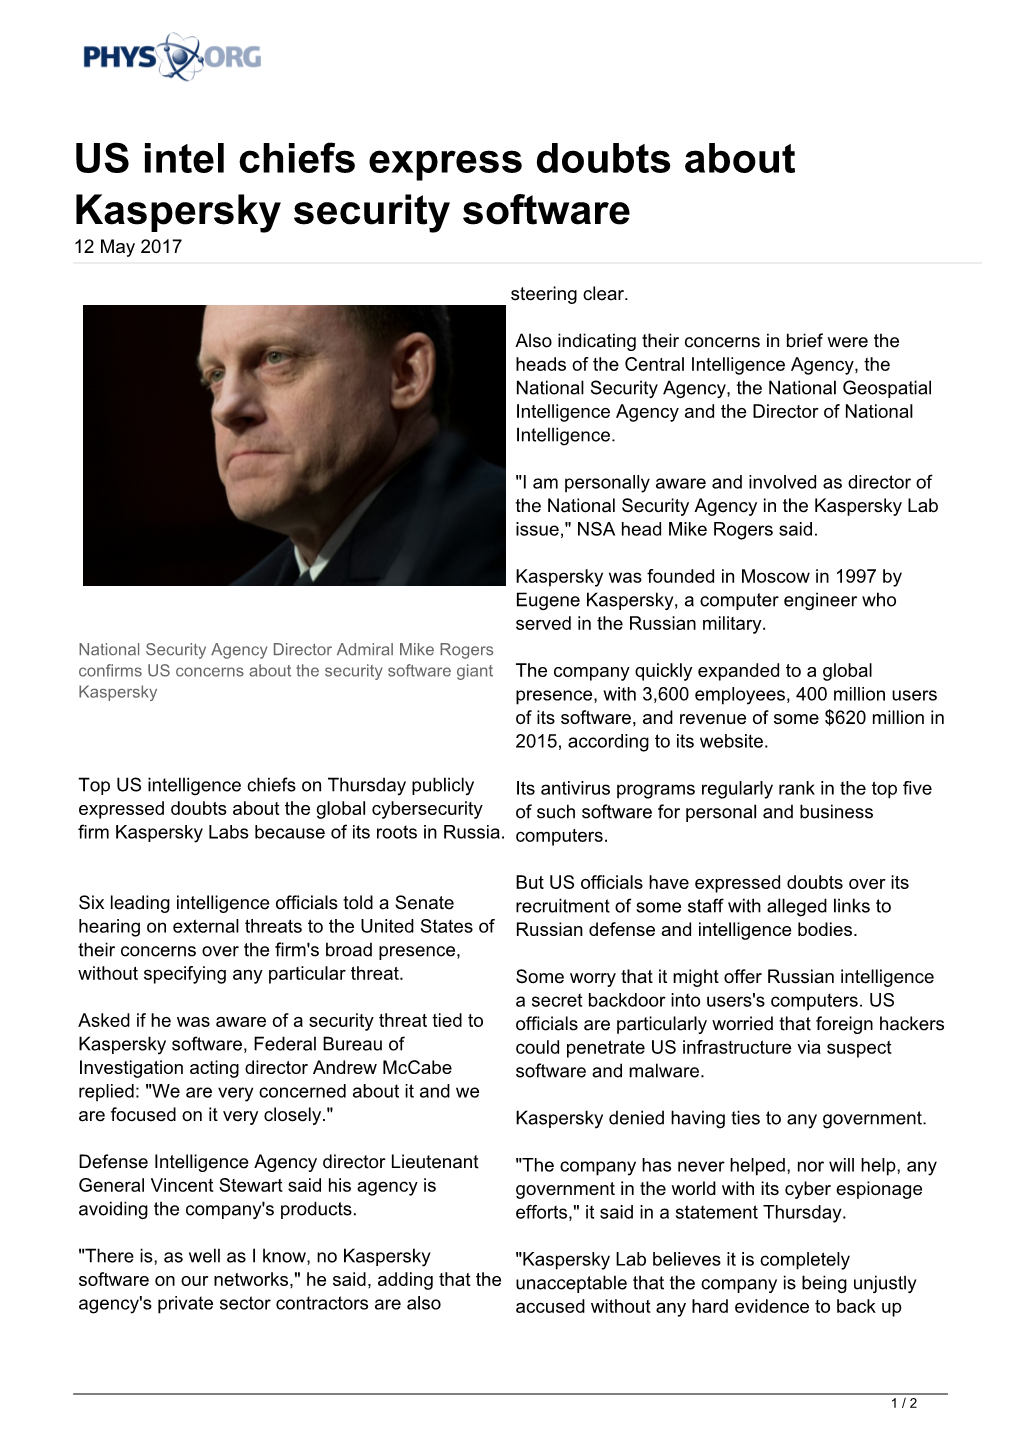 US Intel Chiefs Express Doubts About Kaspersky Security Software 12 May 2017